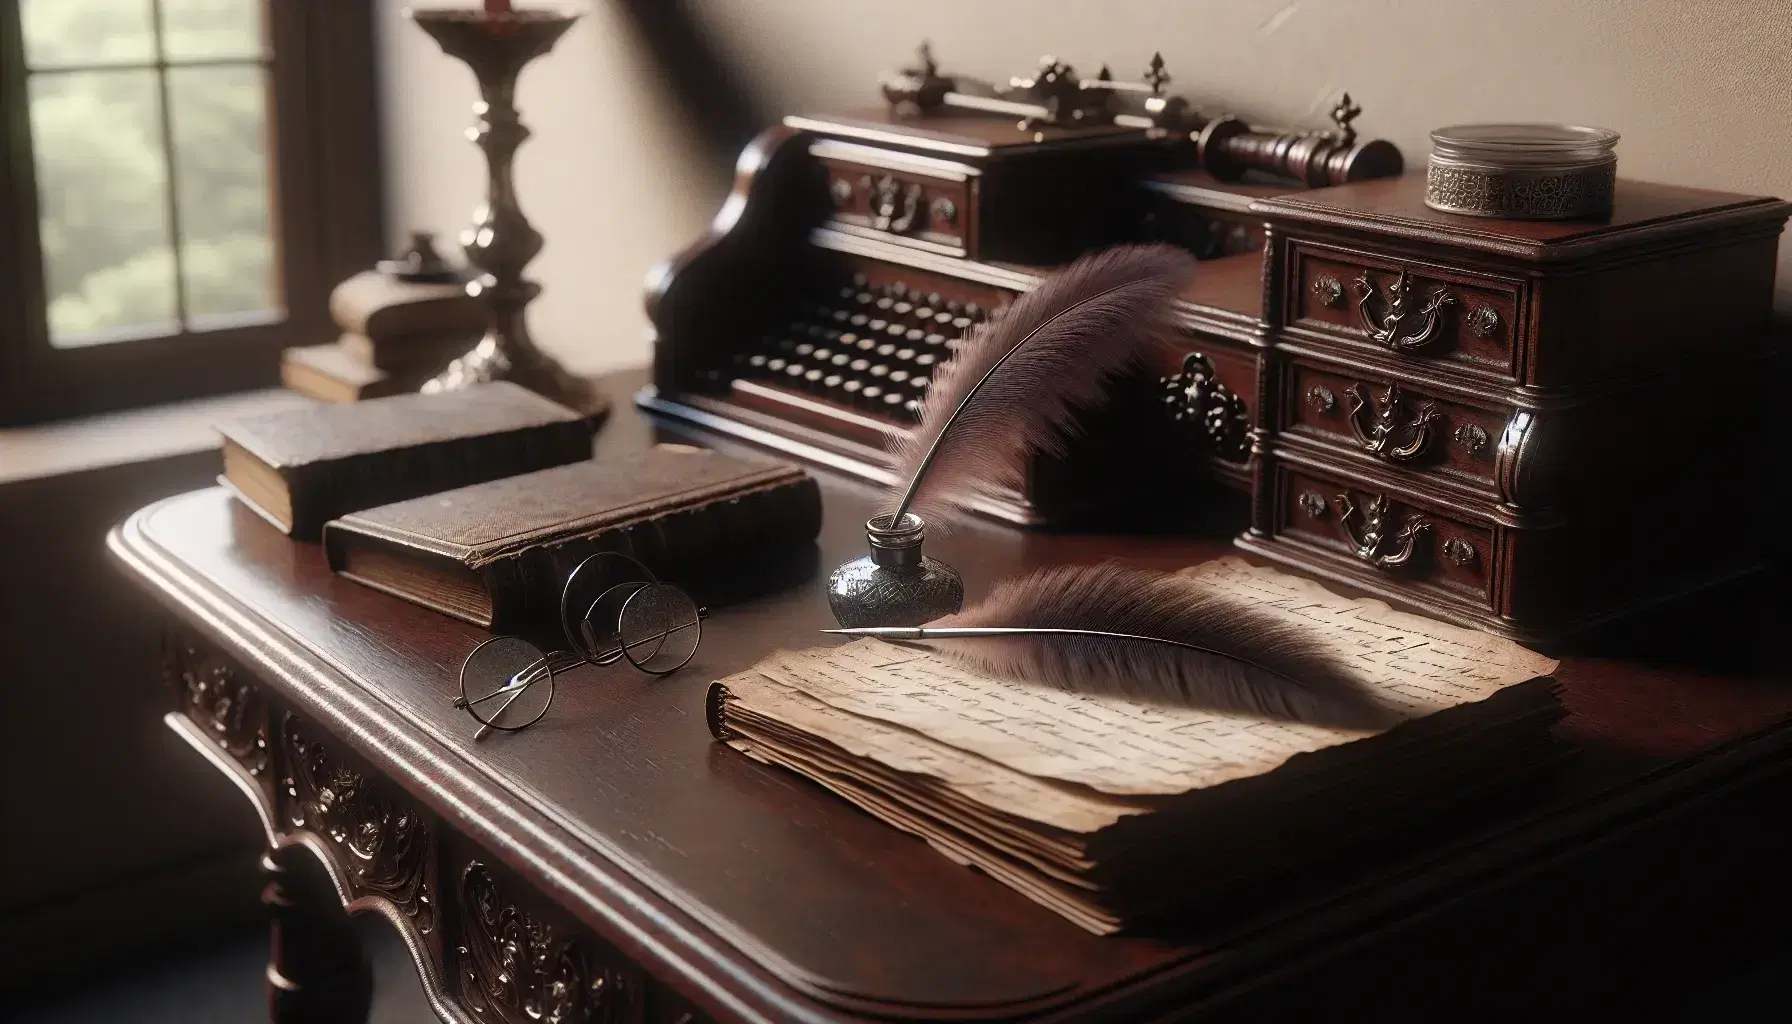 Vintage wooden desk with intricate carvings, quill pen, glass inkwell, hardcover book, and round eyeglasses in a softly lit, blurred historical setting.